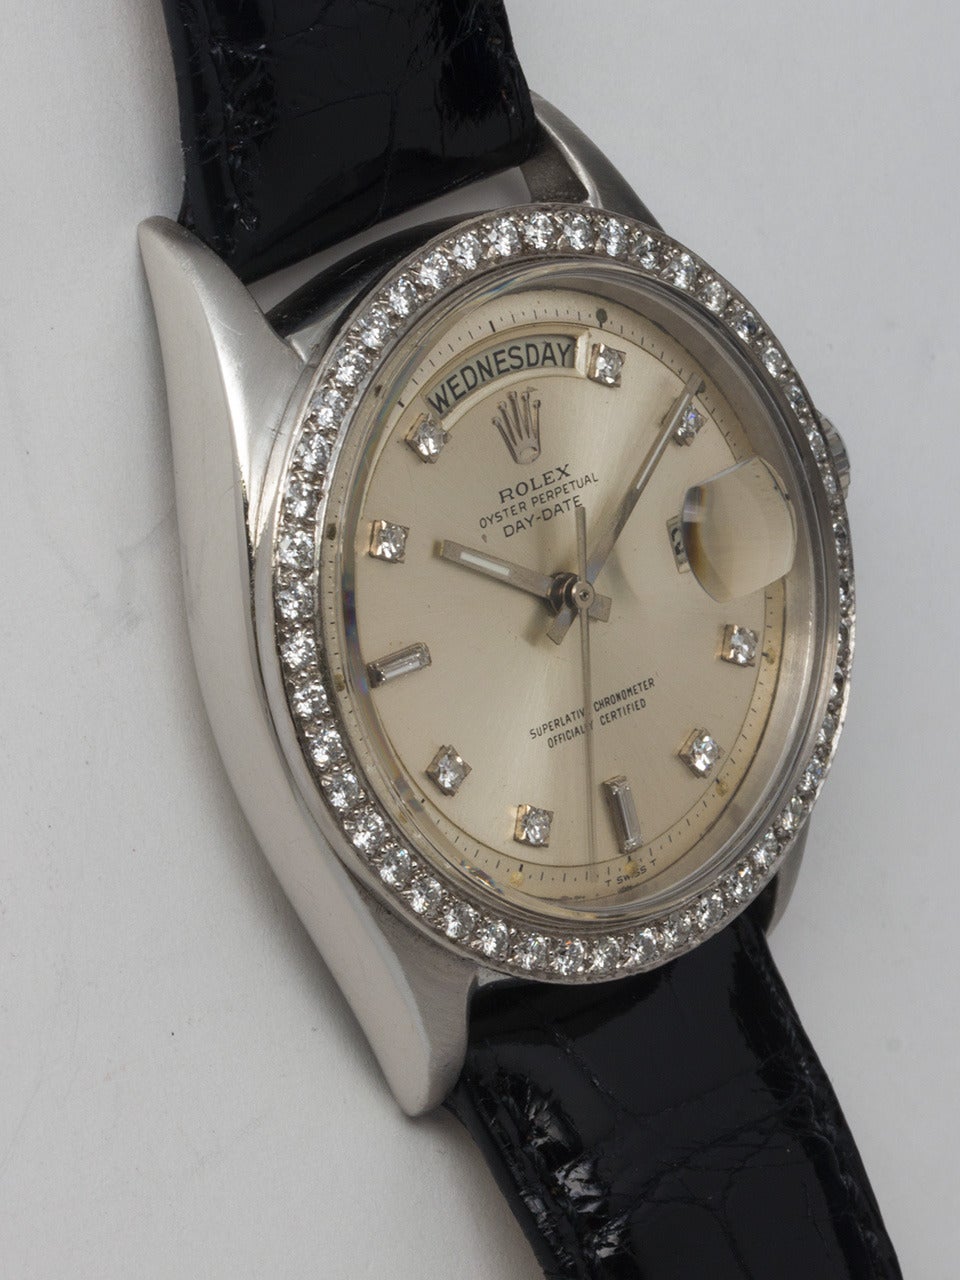 Rolex Platinum Day-Date President Wristwatch, Ref. 1804, serial number 1.5 million, circa 1968. With factory two-tone silvered satin diamond-set pie-pan dial, factory 18k white gold diamond bezel. Stunning full-size 36mm diameter case, acrylic